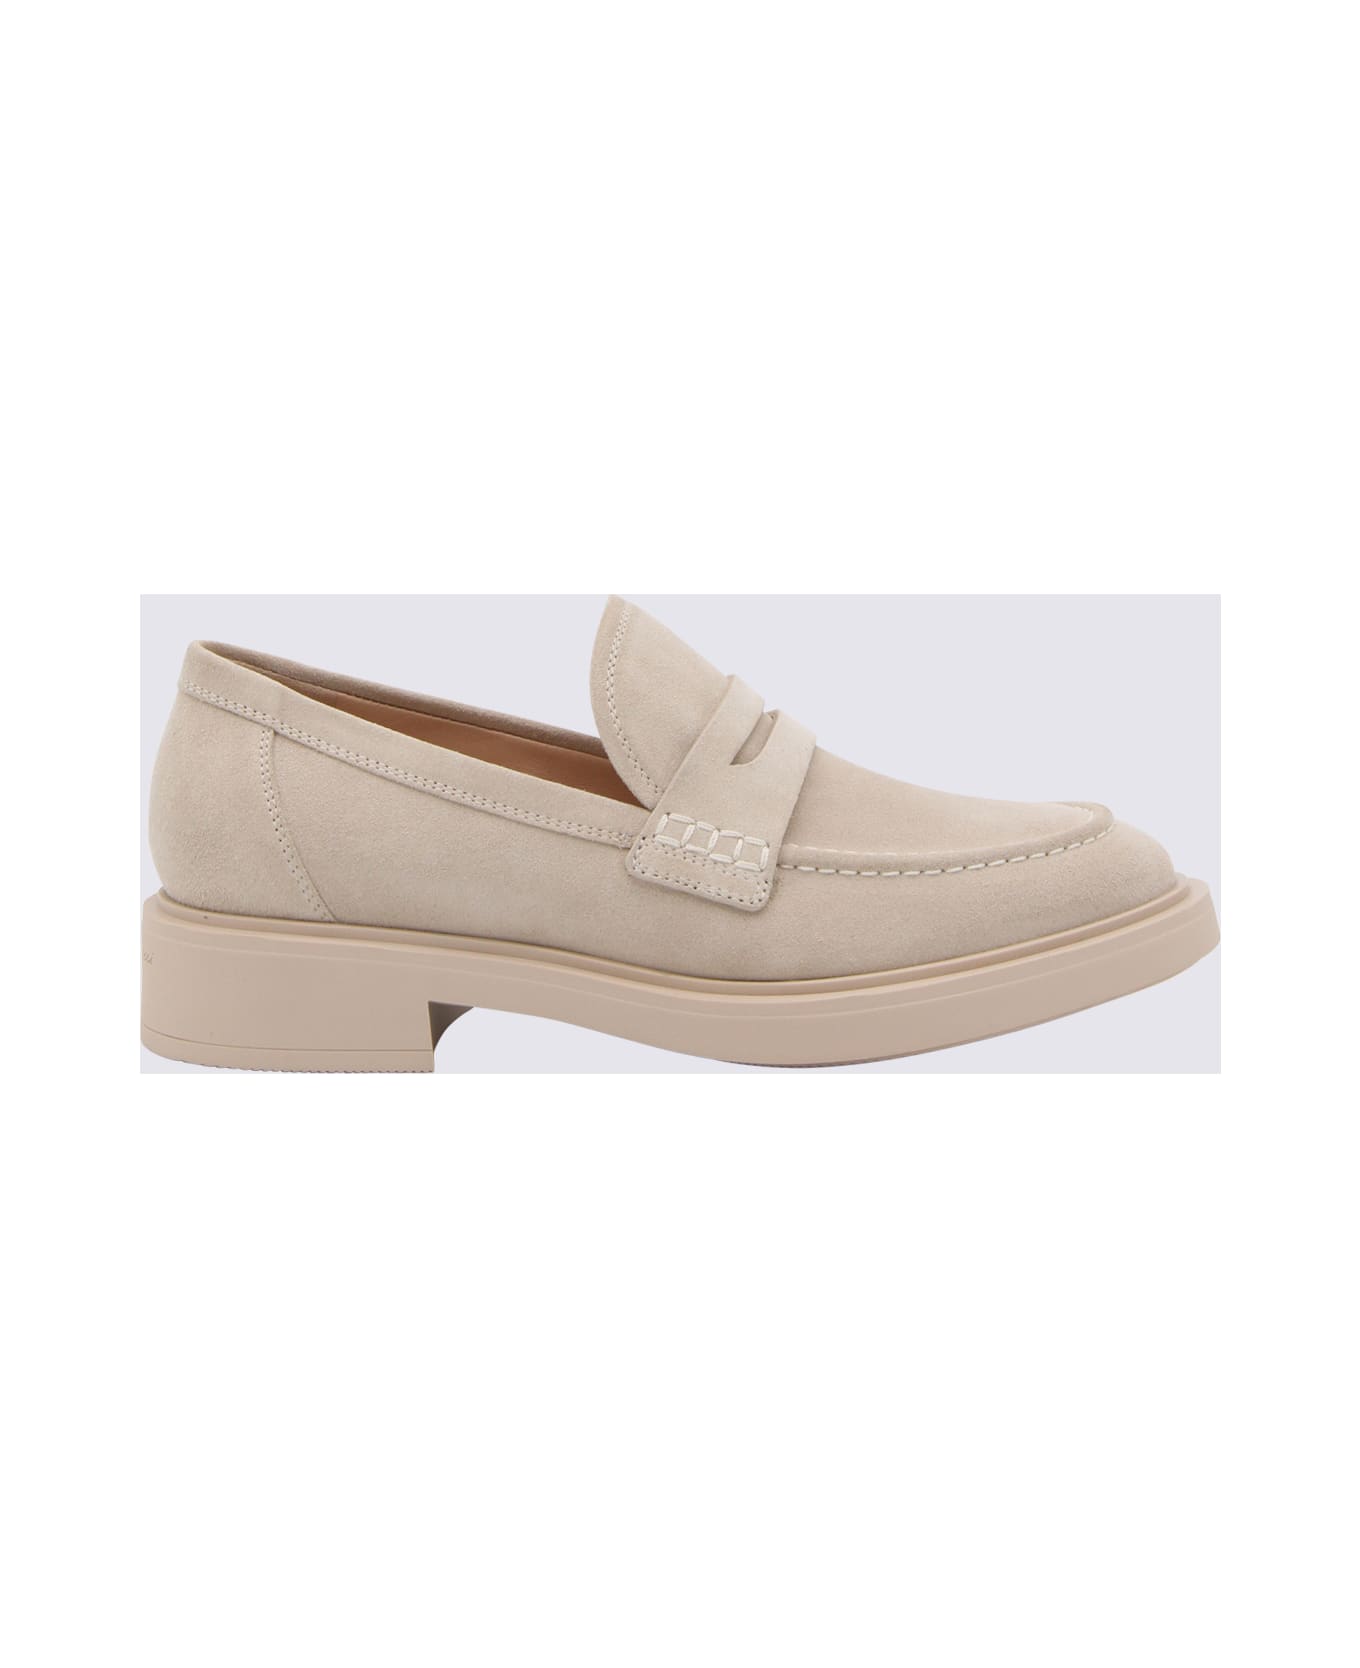 Gianvito Rossi Mousse Suede Loafers - Mousse フラットシューズ